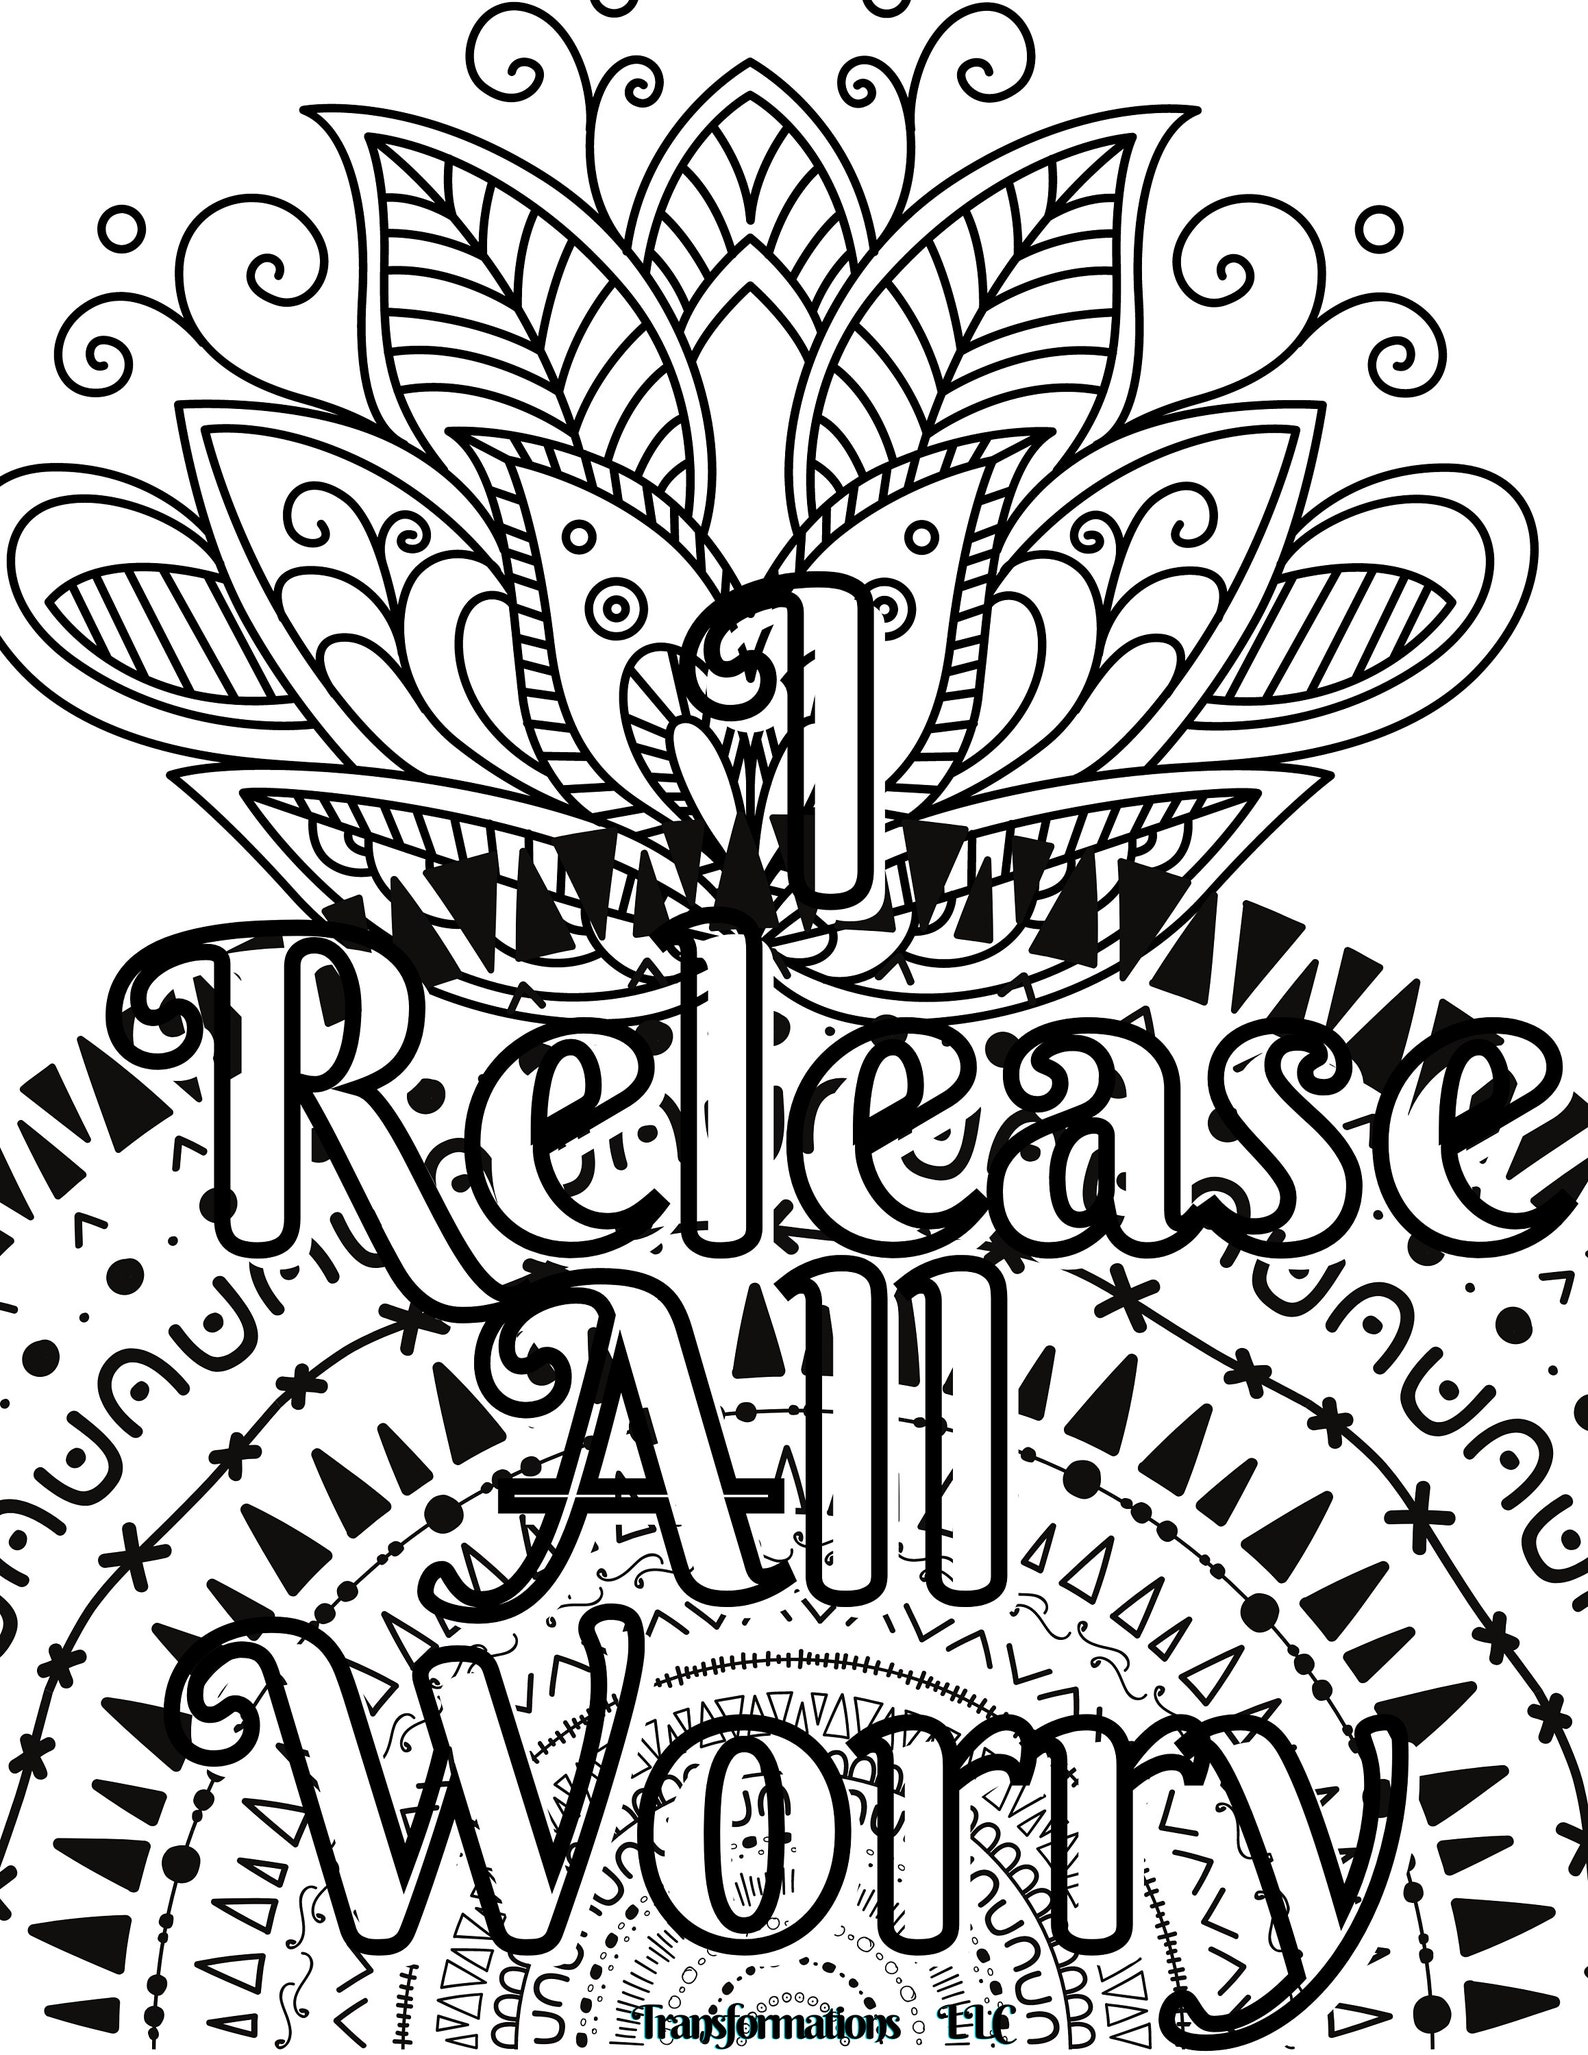 coloring-pages-art-therapy-created-by-a-therapist-to-achieve-peace-of-mind-and-release-anxiety